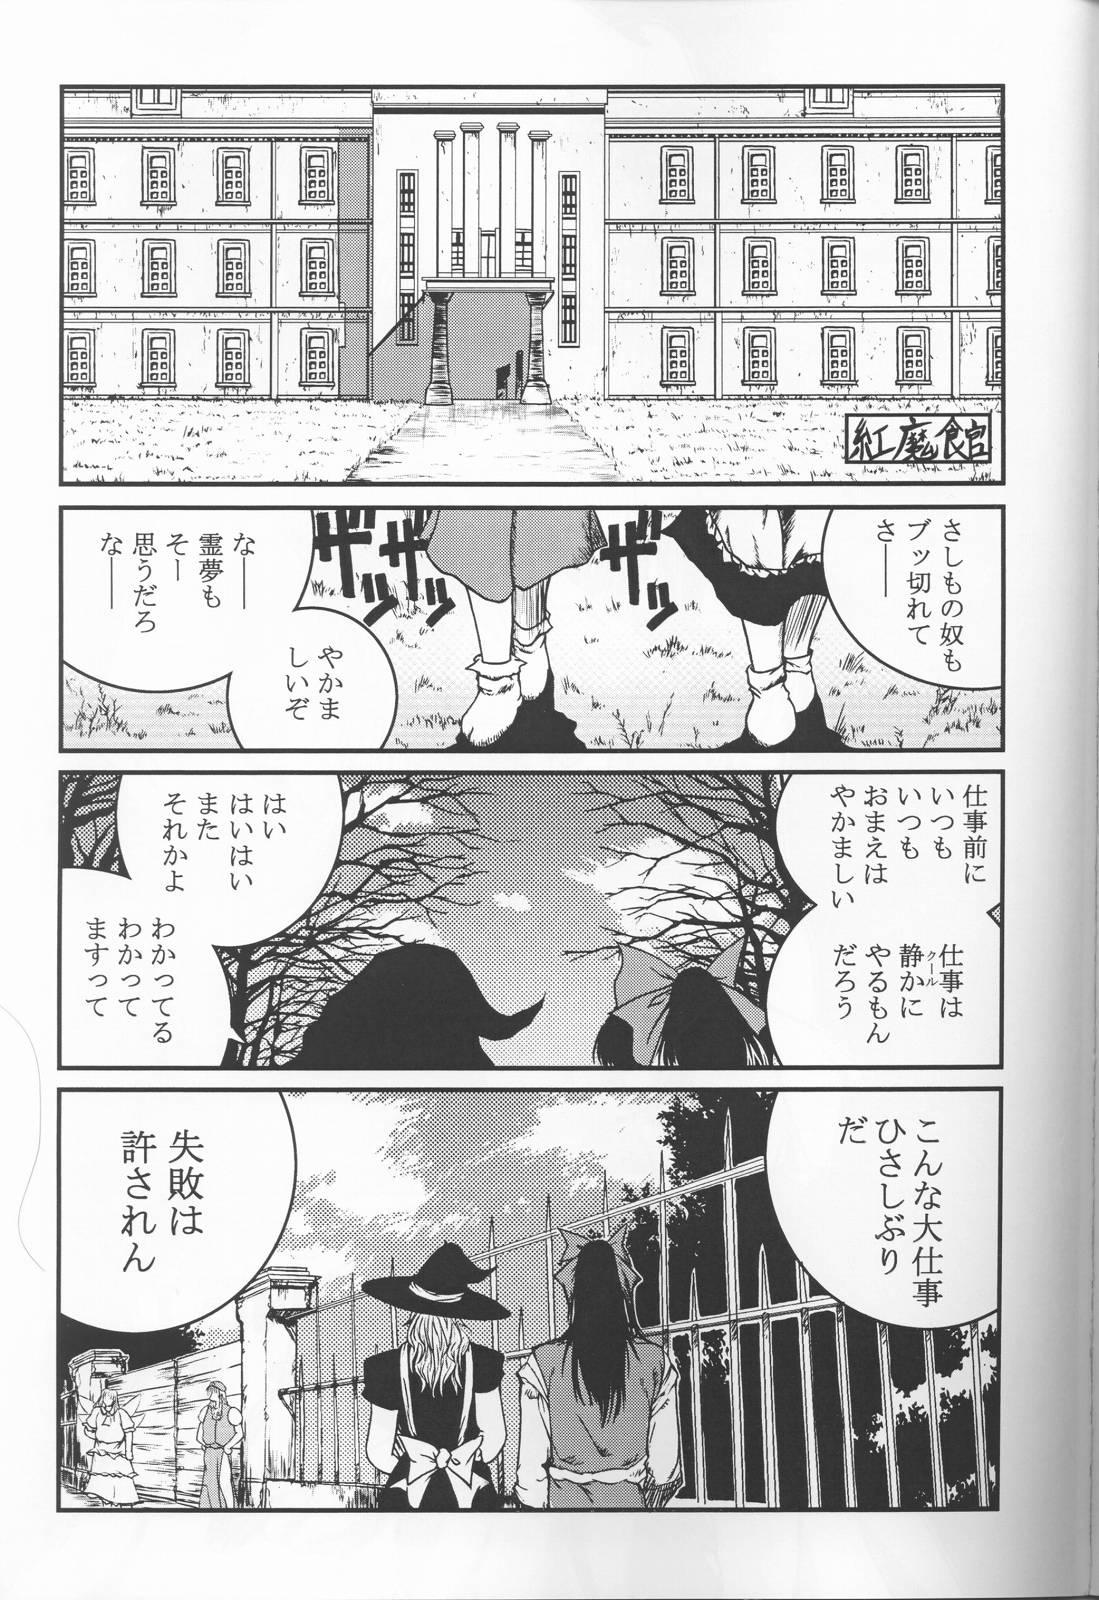 Cut HELLSING？ - Touhou project Shemales - Page 4